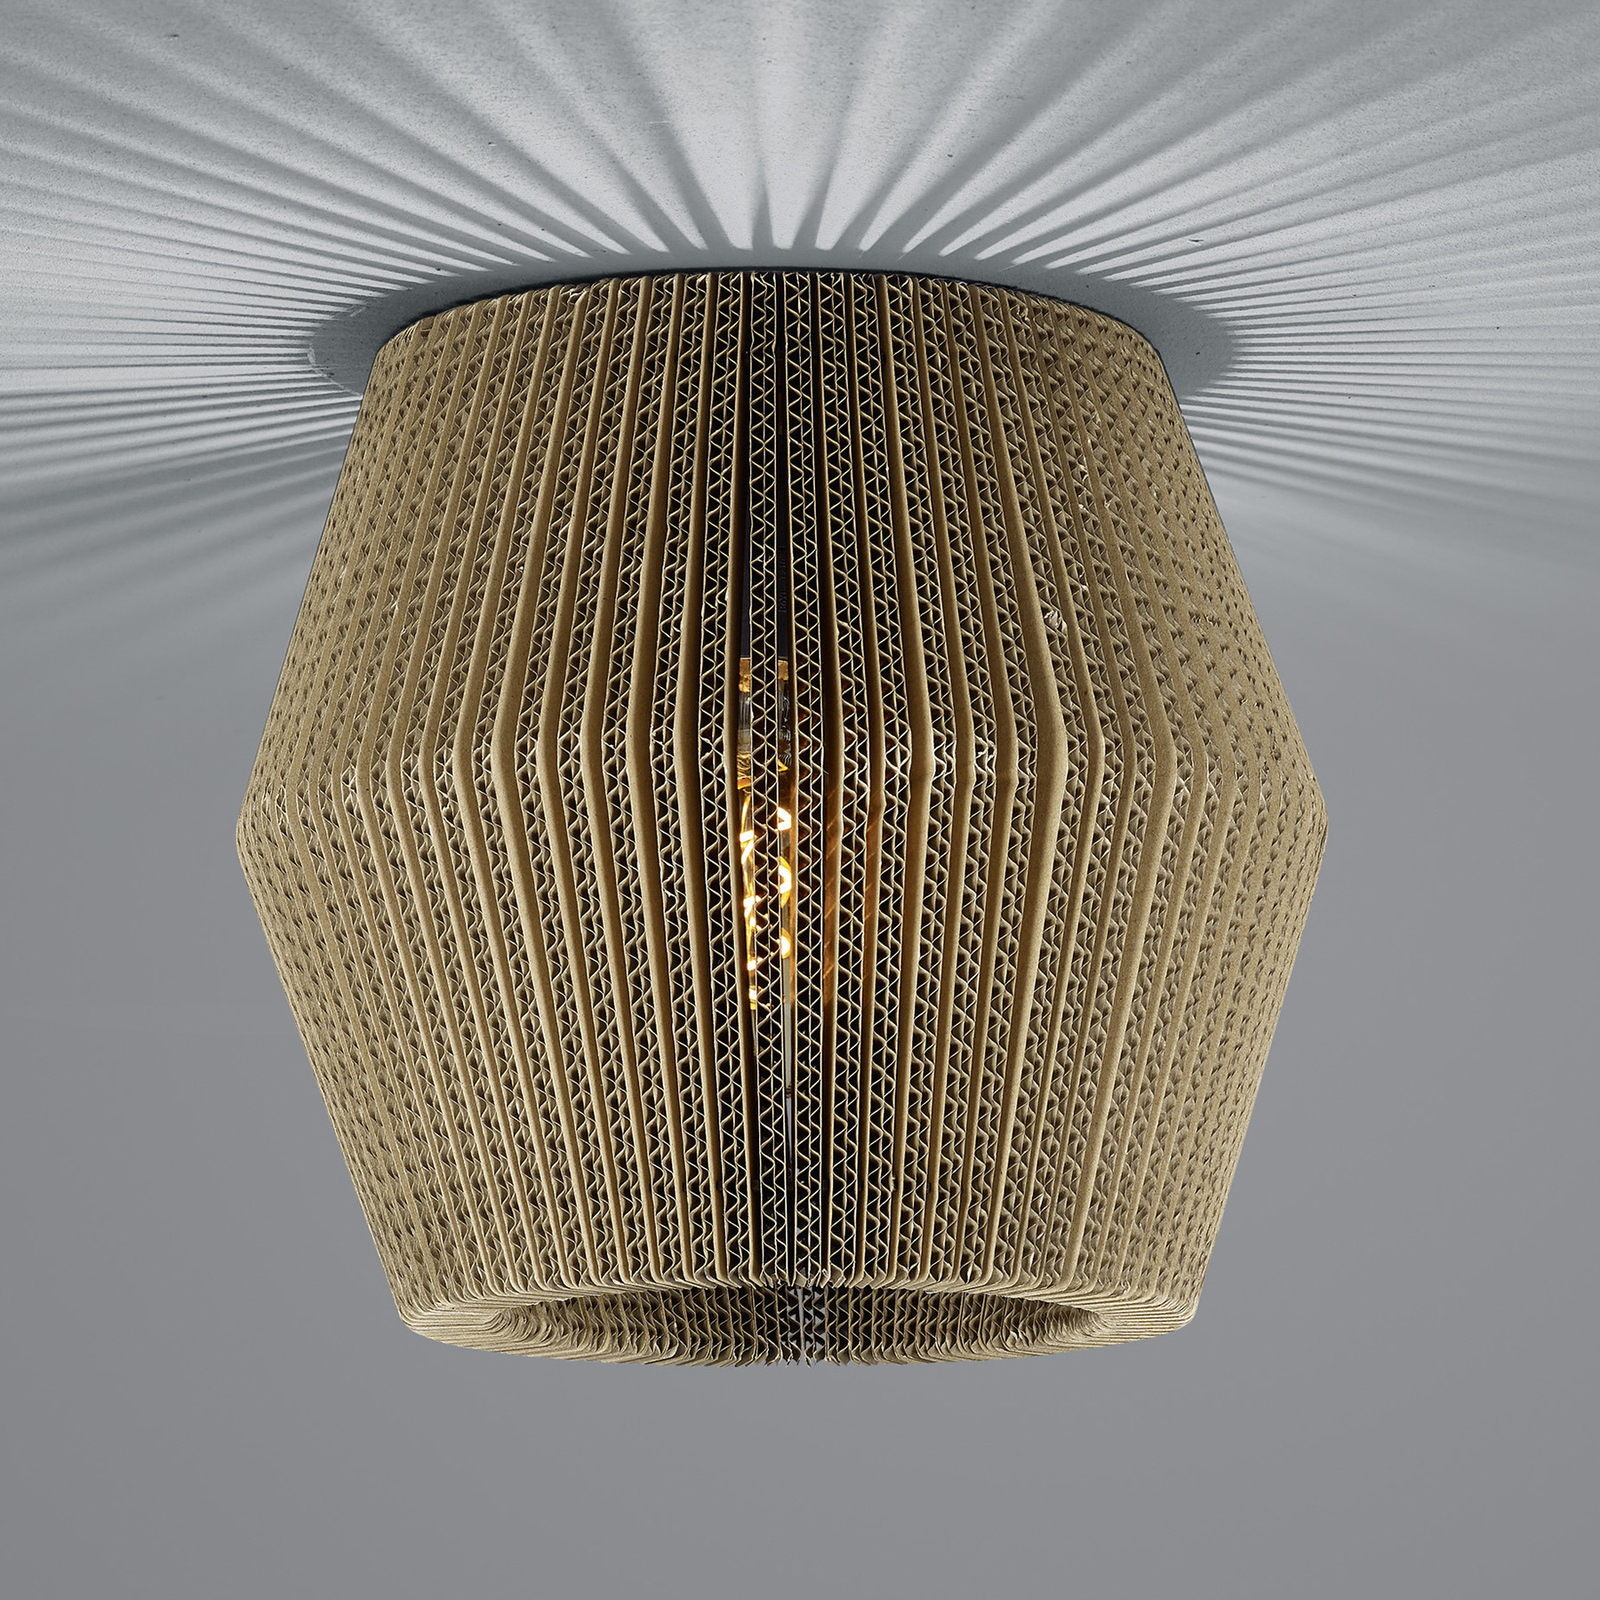 Layer ceiling light made of cardboard, double truncated cone